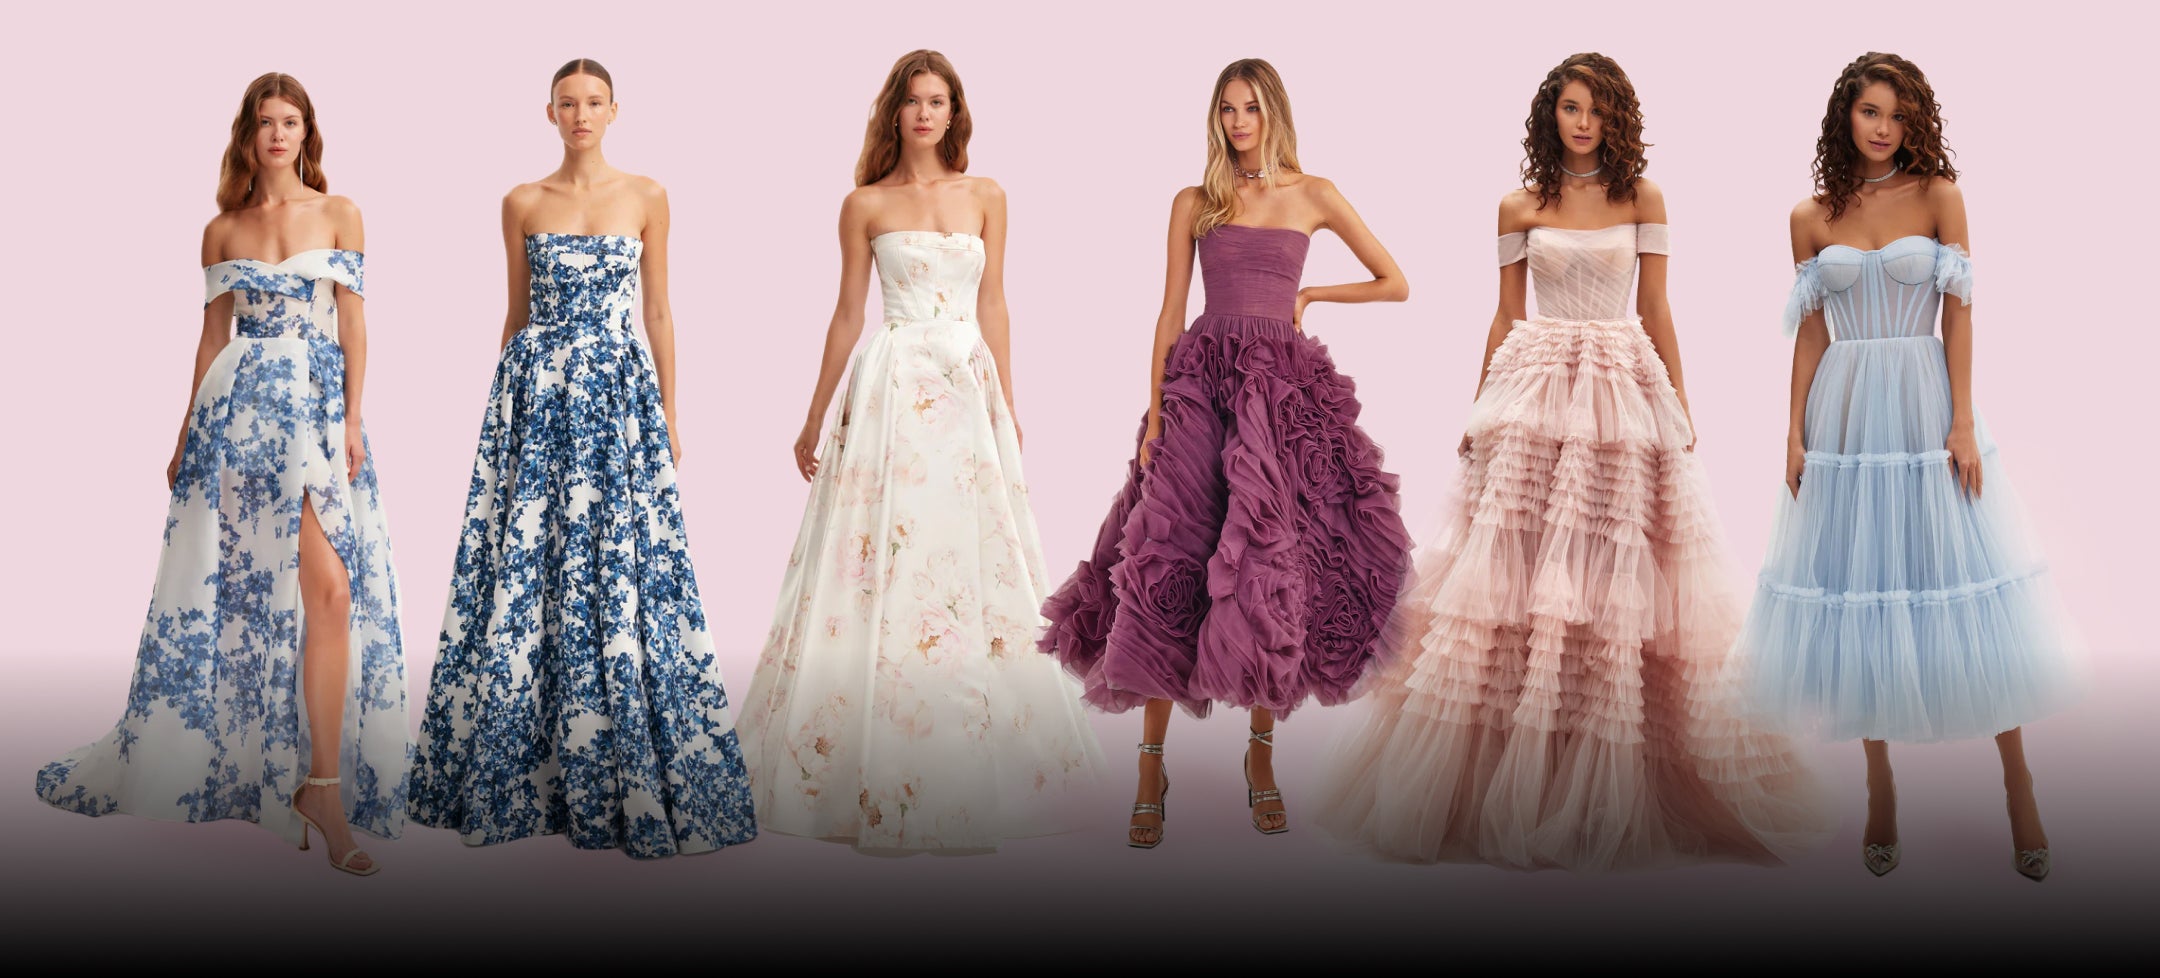 A guide to consider when choosing a prom dress